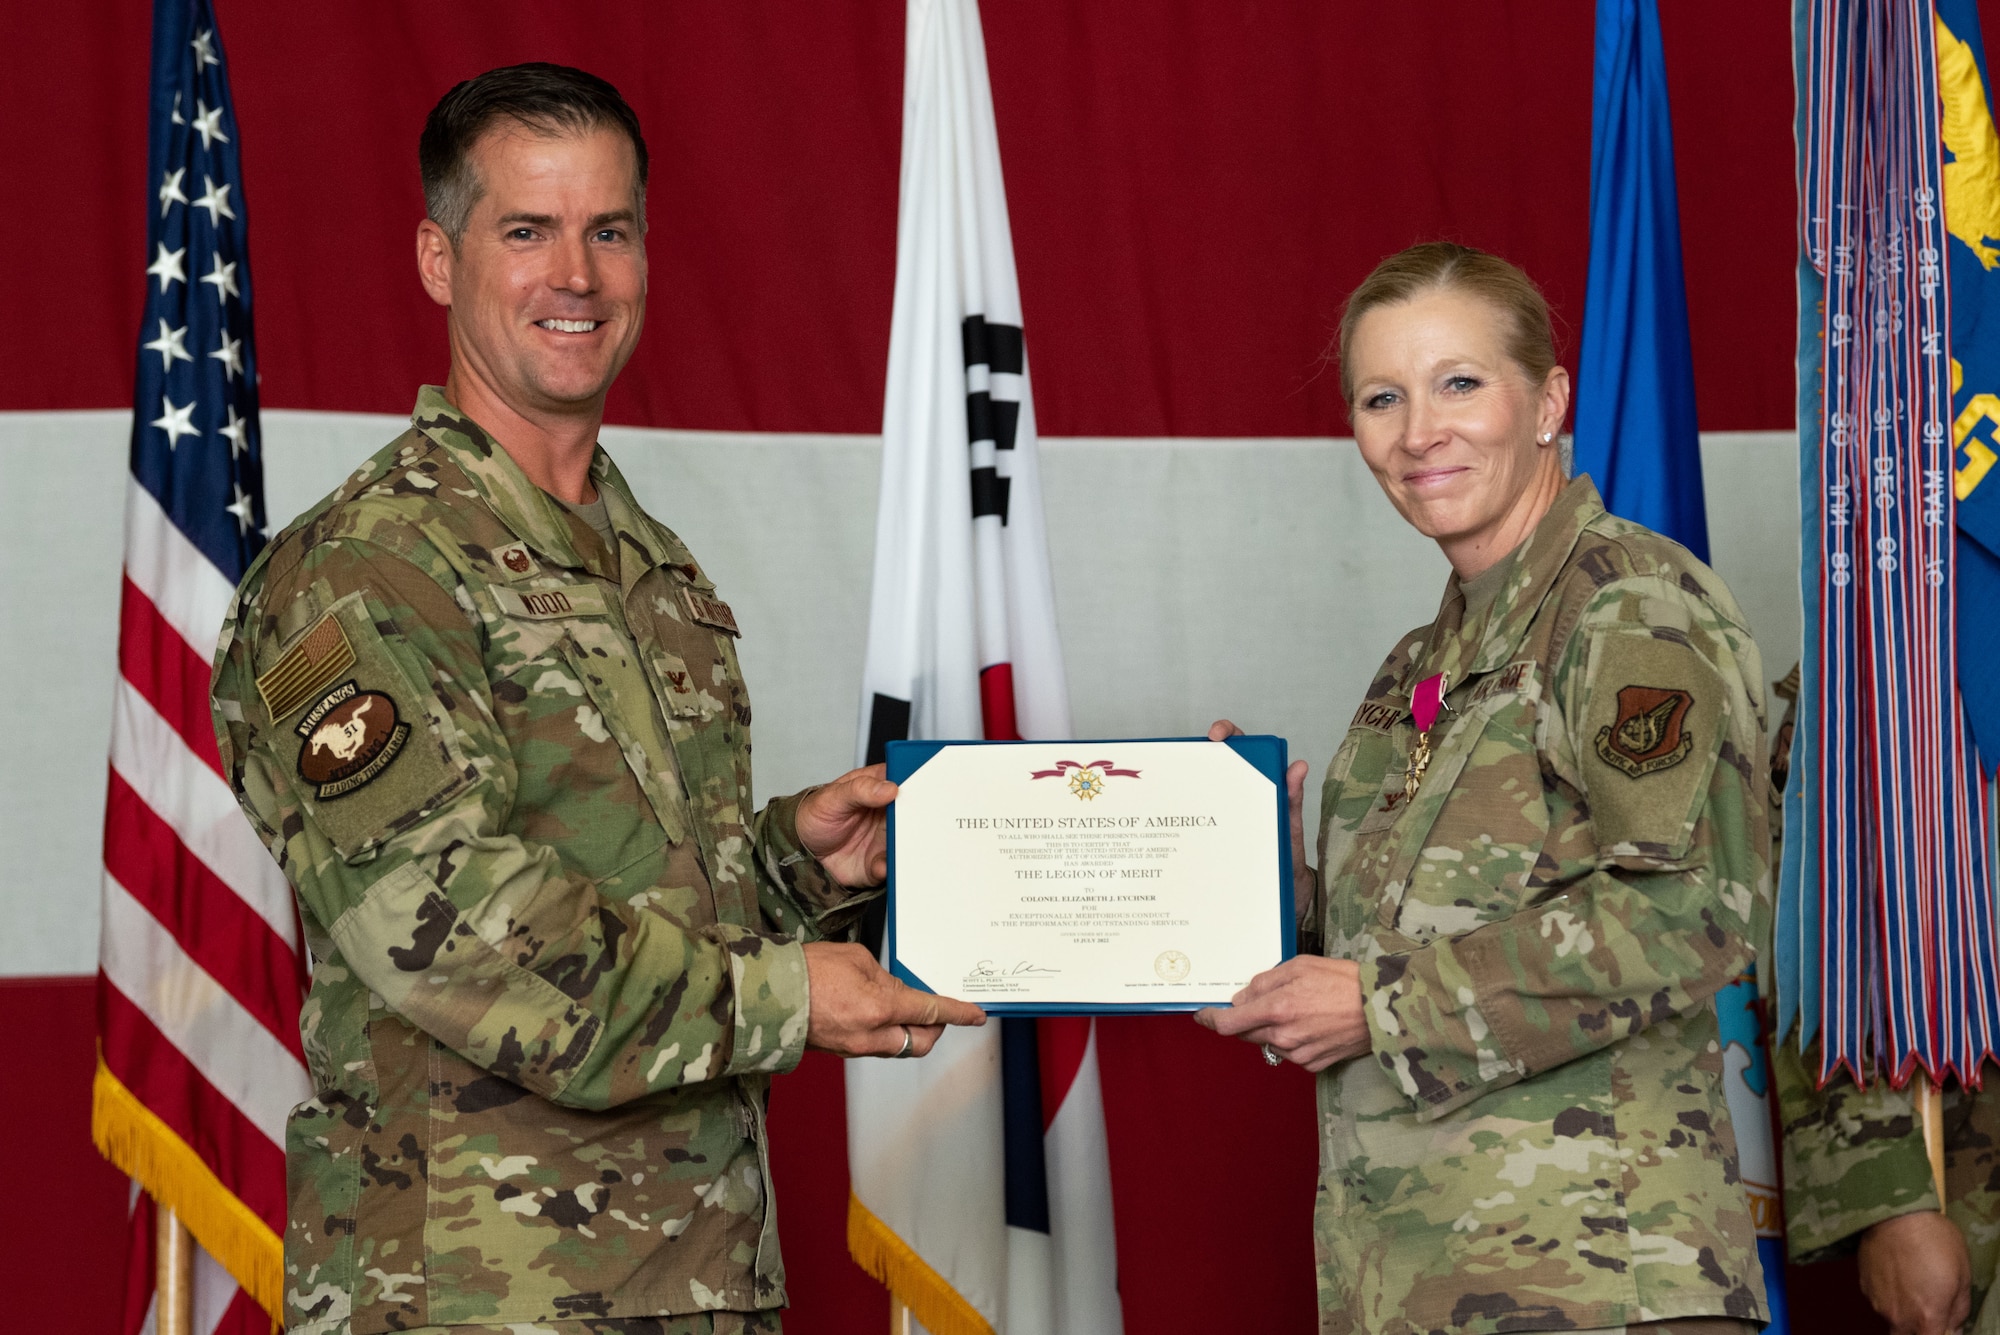 Col. Joshua Wood, 51st Fighter Wing commander, presents Col. Jonelle Eychner, 51st Mission Support Group outgoing commander, with the Legion of Merit medal during the 51st MSG change of command ceremony at Osan Air Base, Republic of Korea, July 13, 2022.